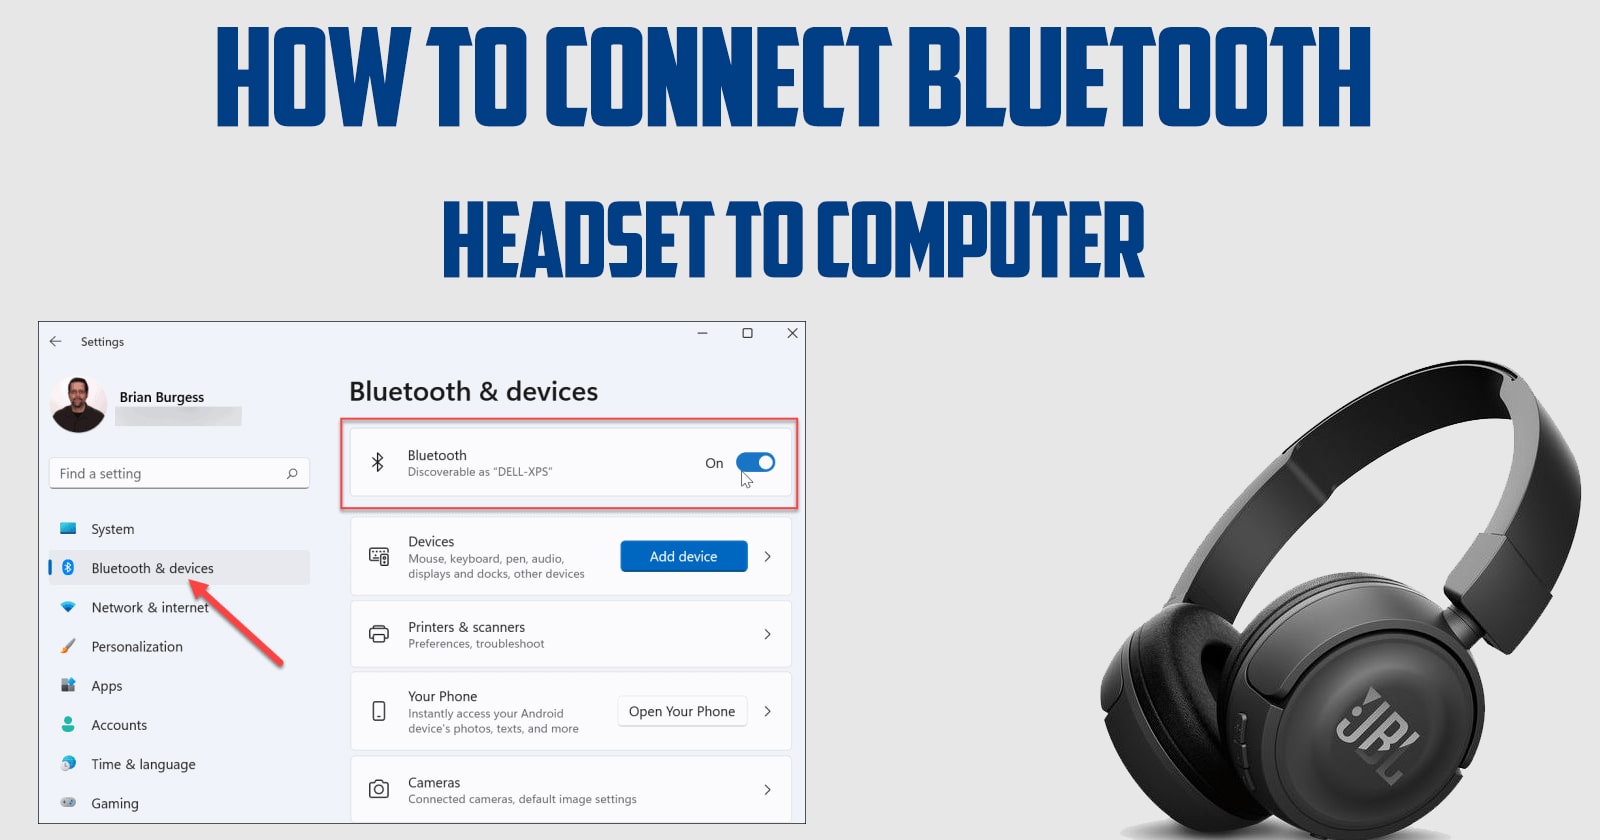 How to Connect Bluetooth Headset to Computer?